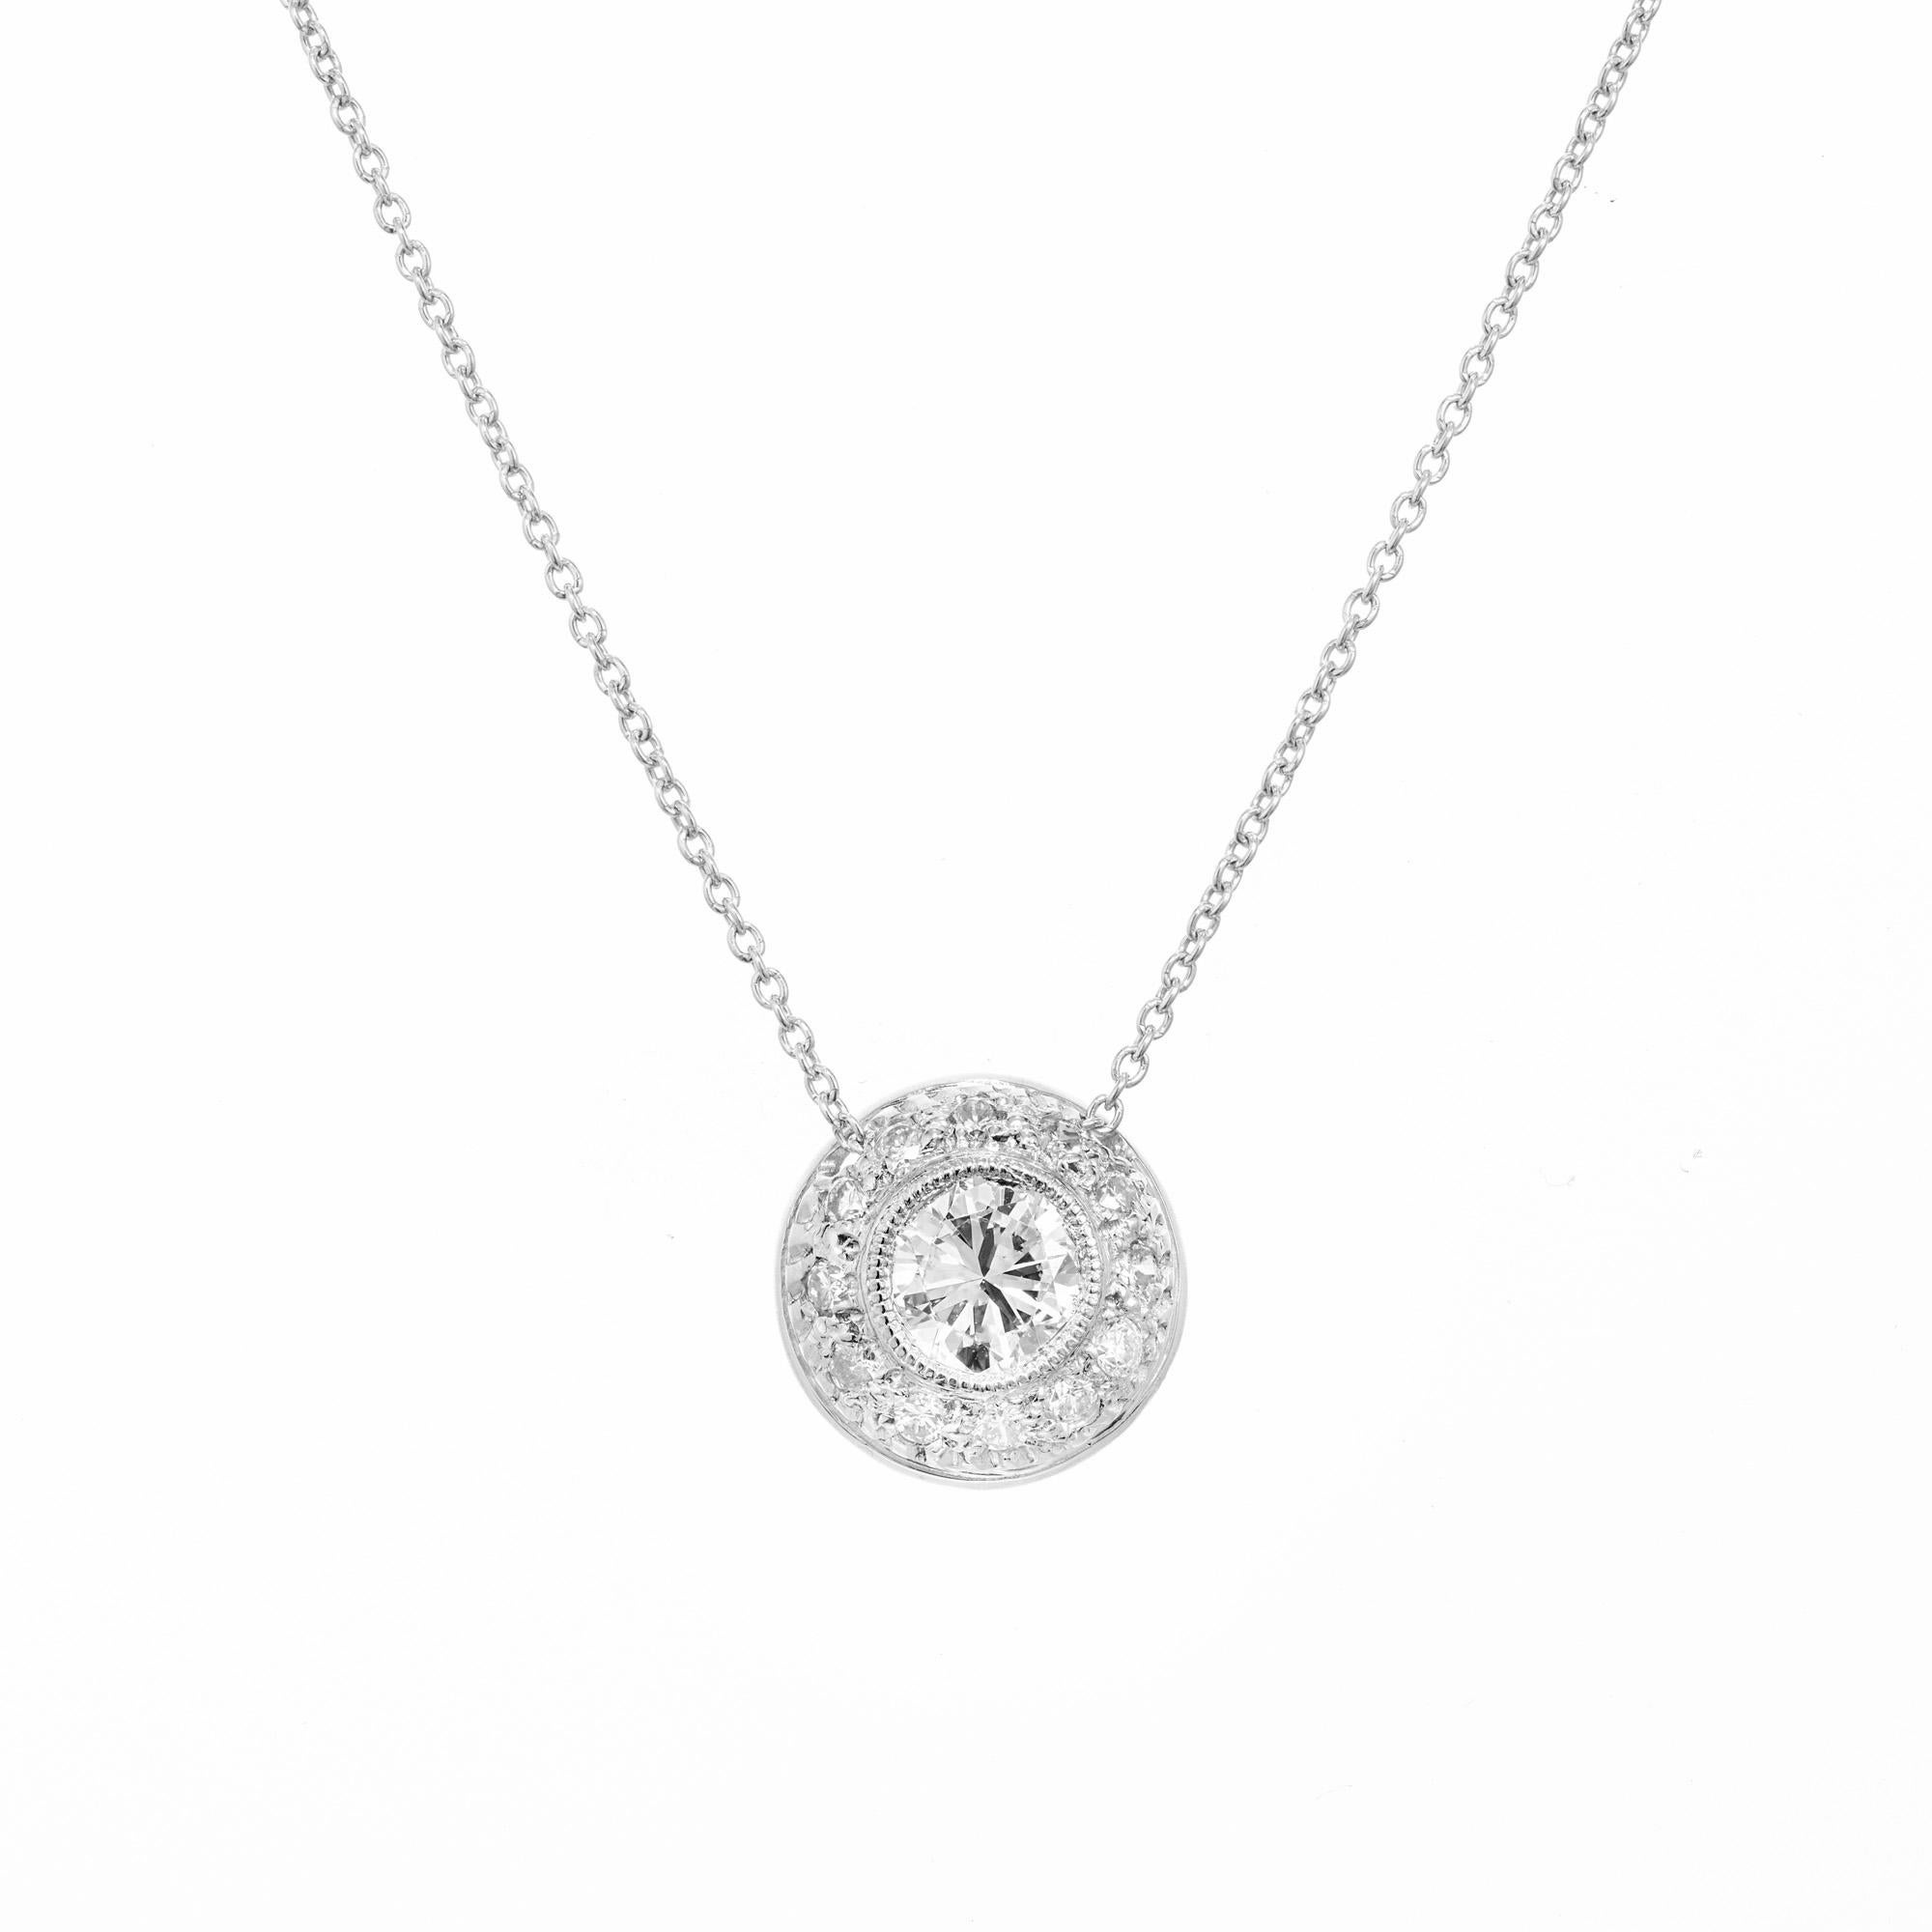 Antique inspired domed round diamond Slide pendant necklace. .53ct round cut center diamond in a mounted platinum beaded bezel slide setting. Accented with 12 round pave set diamonds. 18 inch platinum chain. Designed and crafted in the Peter Suchy